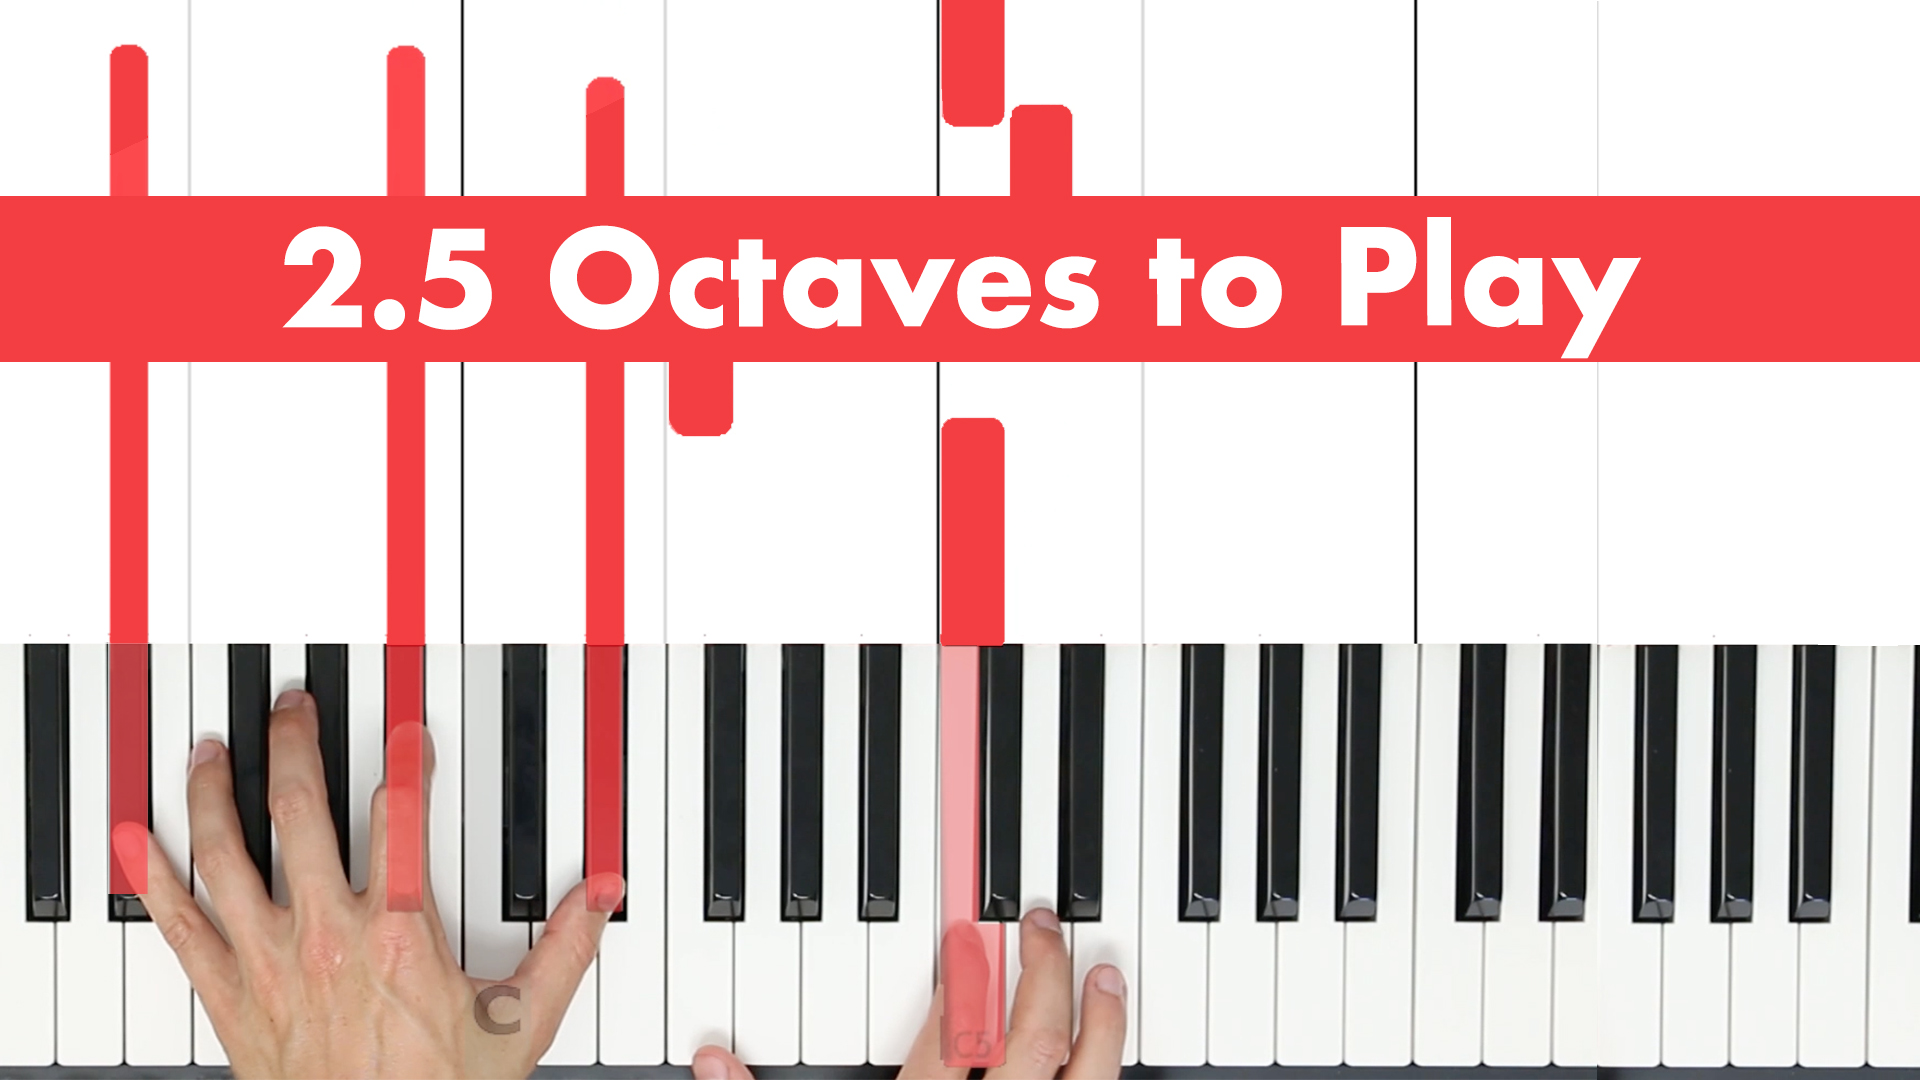 2.5 Octaves to Play